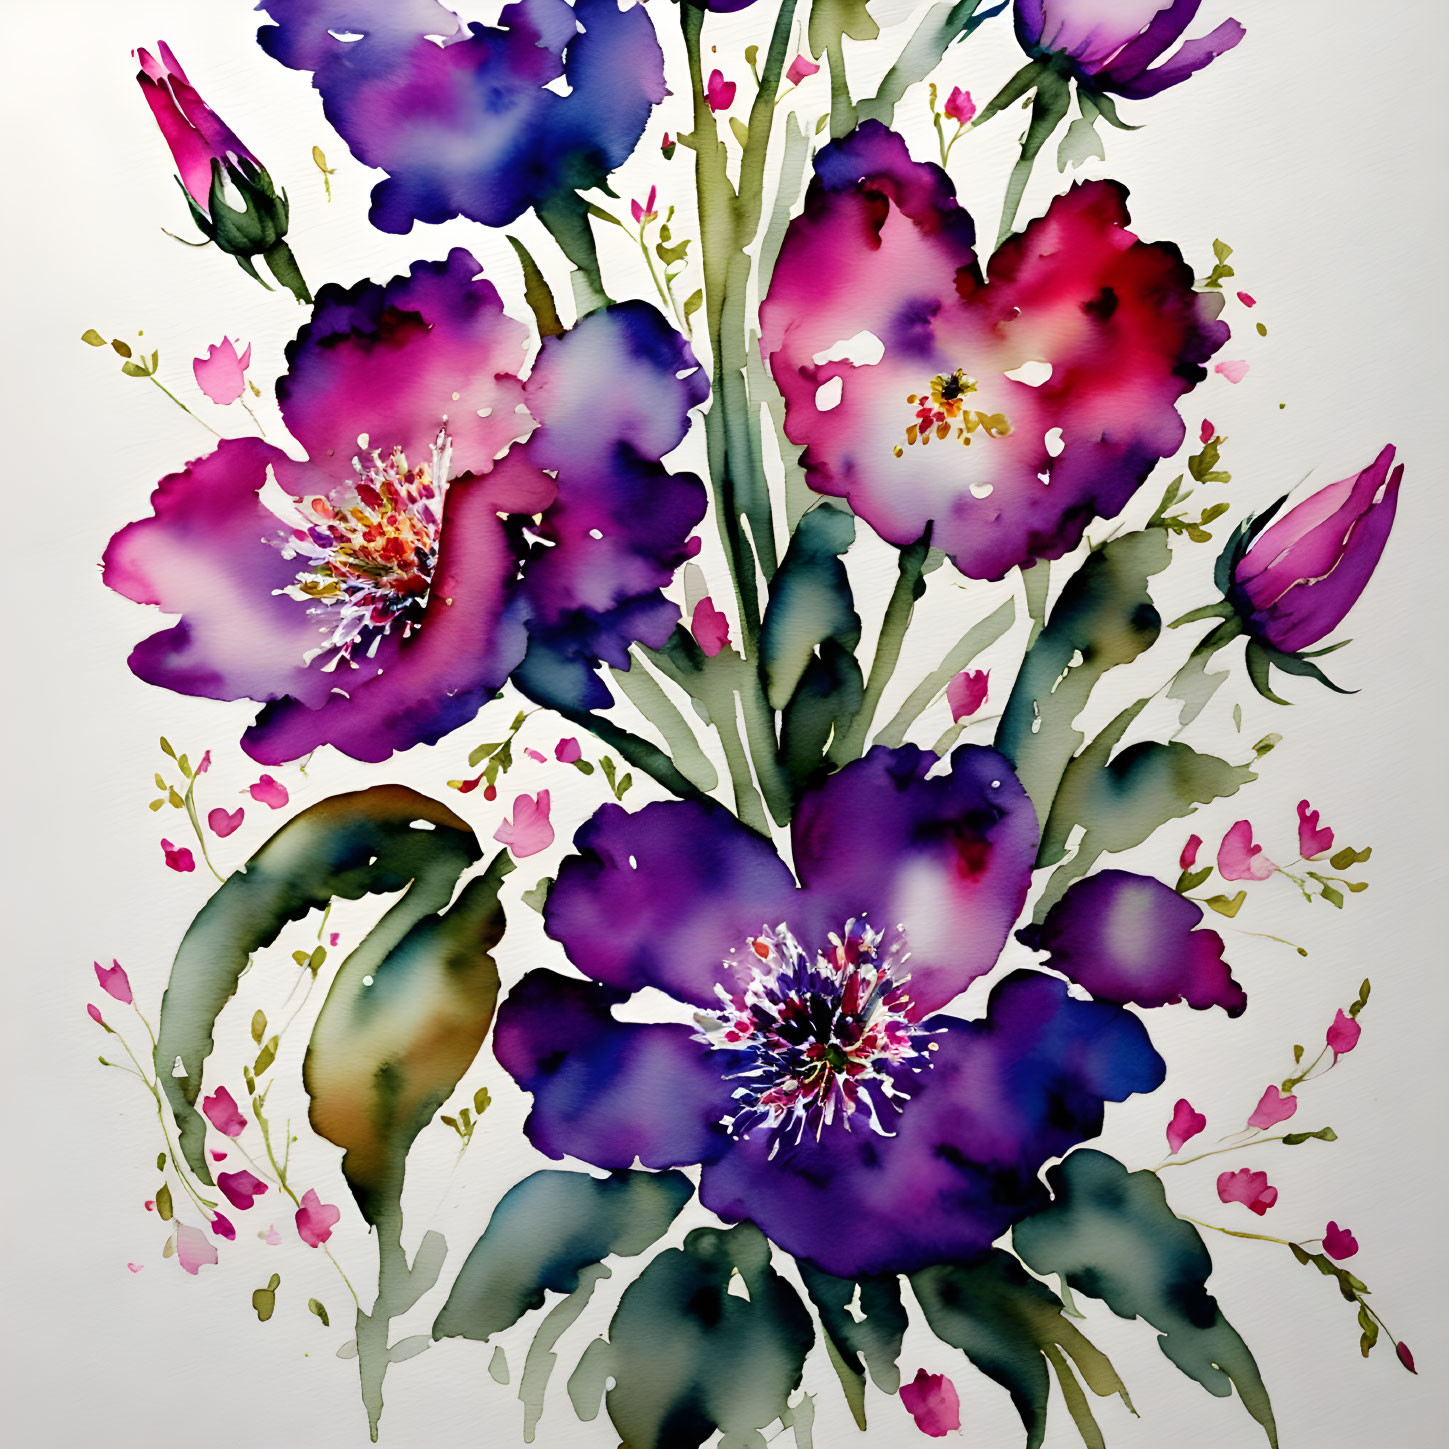 Vibrant purple and pink flowers in watercolor painting